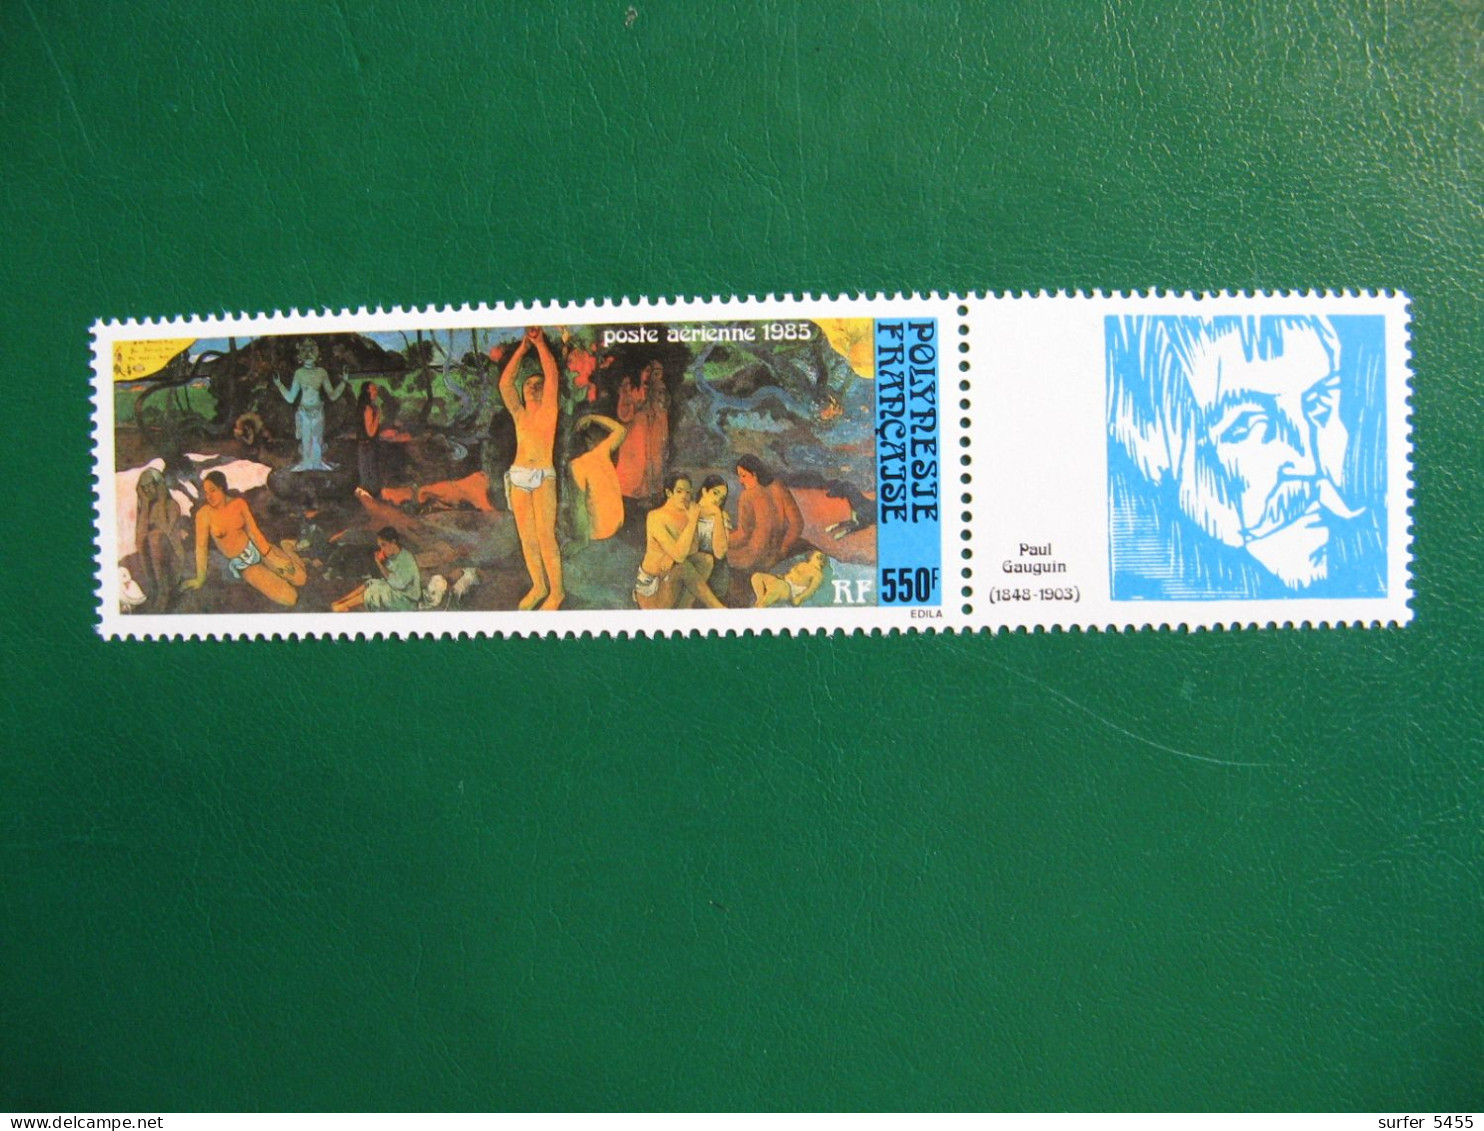 P0LYNESIE PO AERIENNE N° 186 AVEC INTERCALAIRE TIMBRE NEUF ** LUXE - MNH - SERIE COMPLETE - FACIALE 4,61 EUROS - Unused Stamps